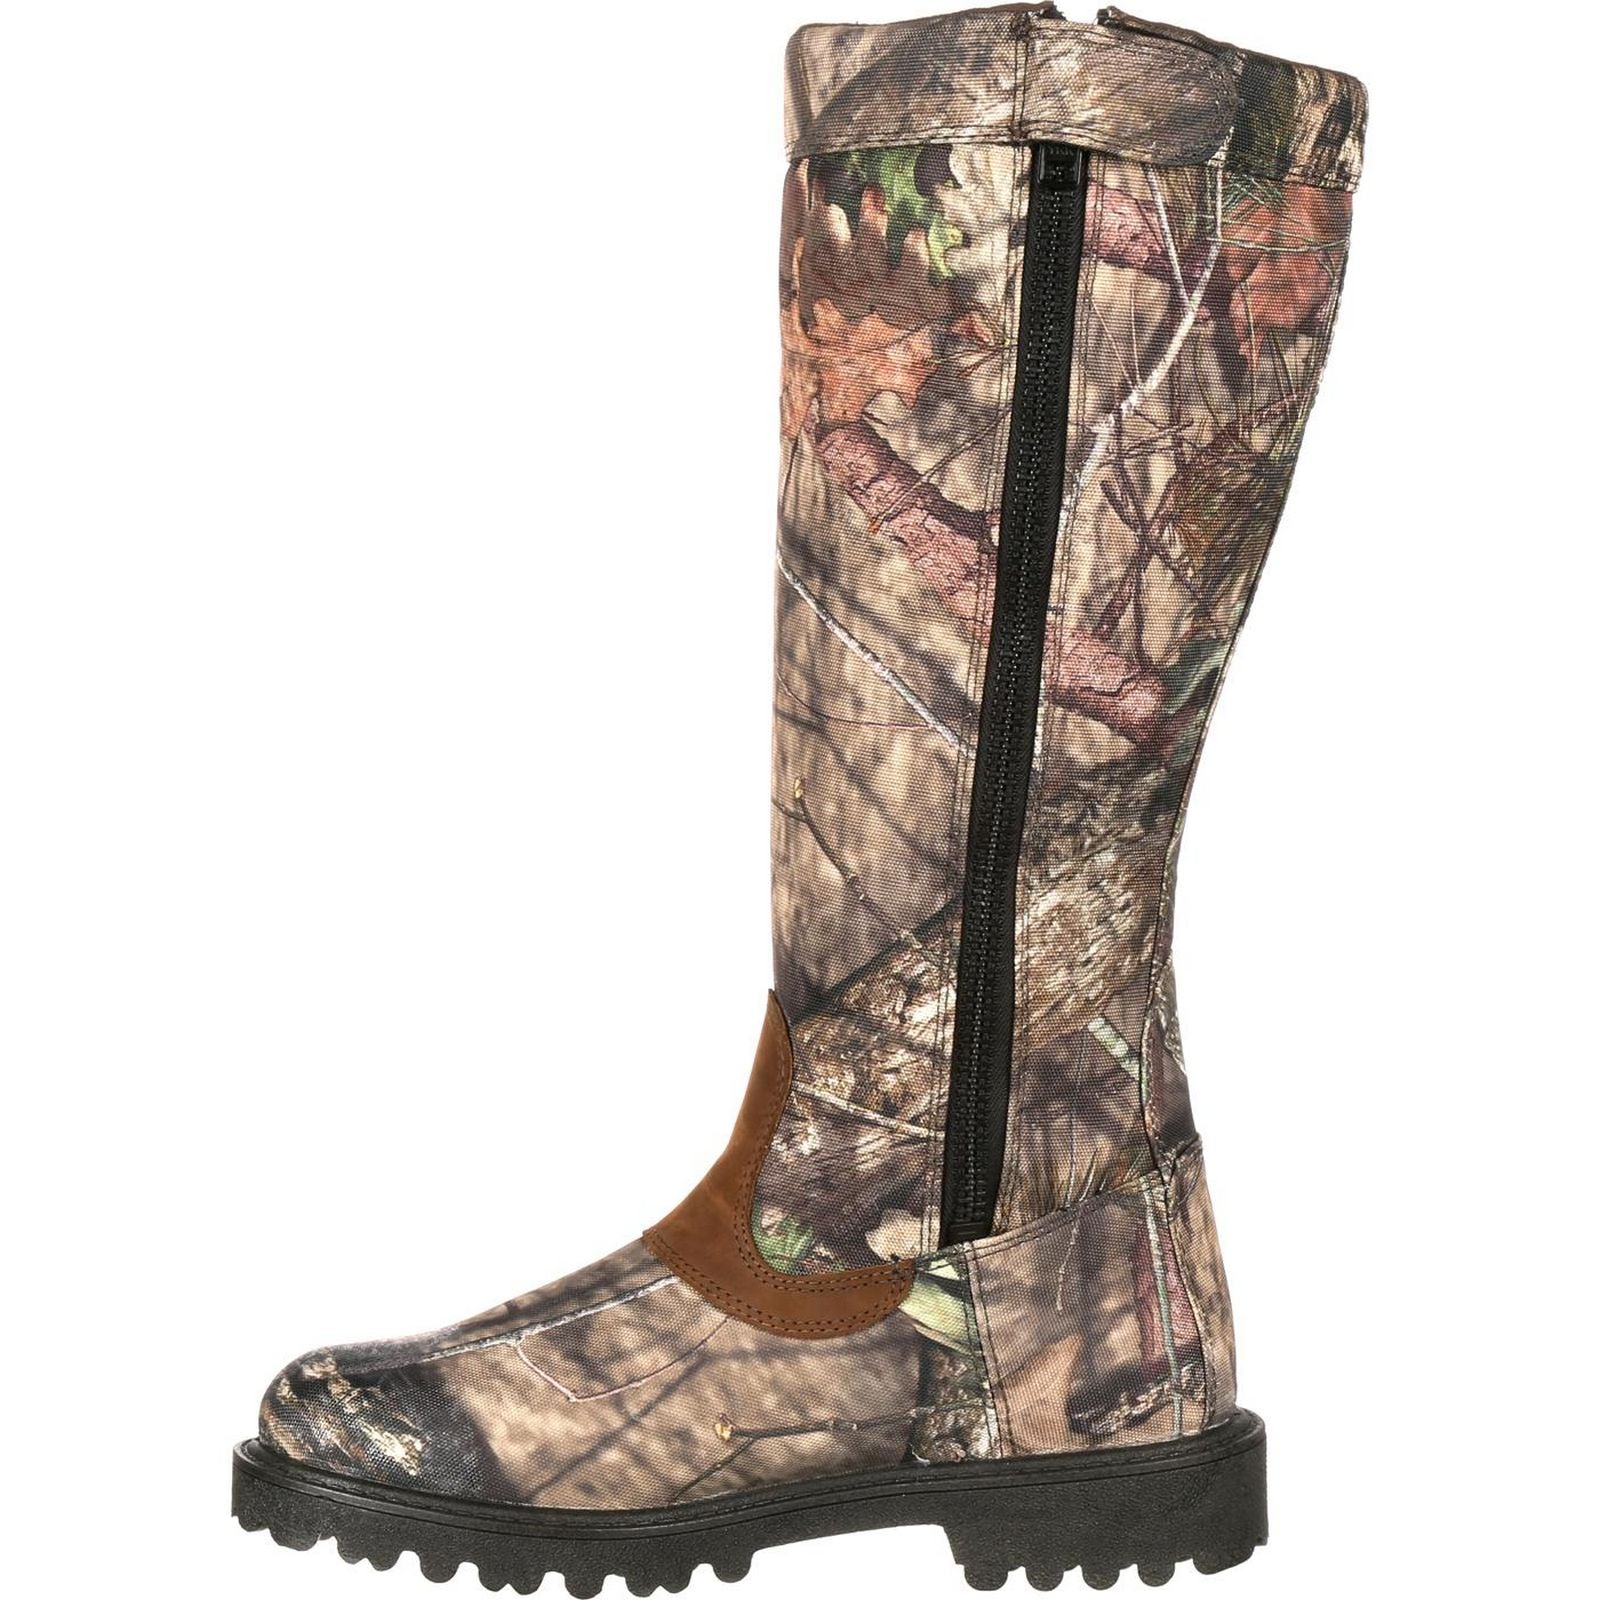 rocky hunting boots clearance